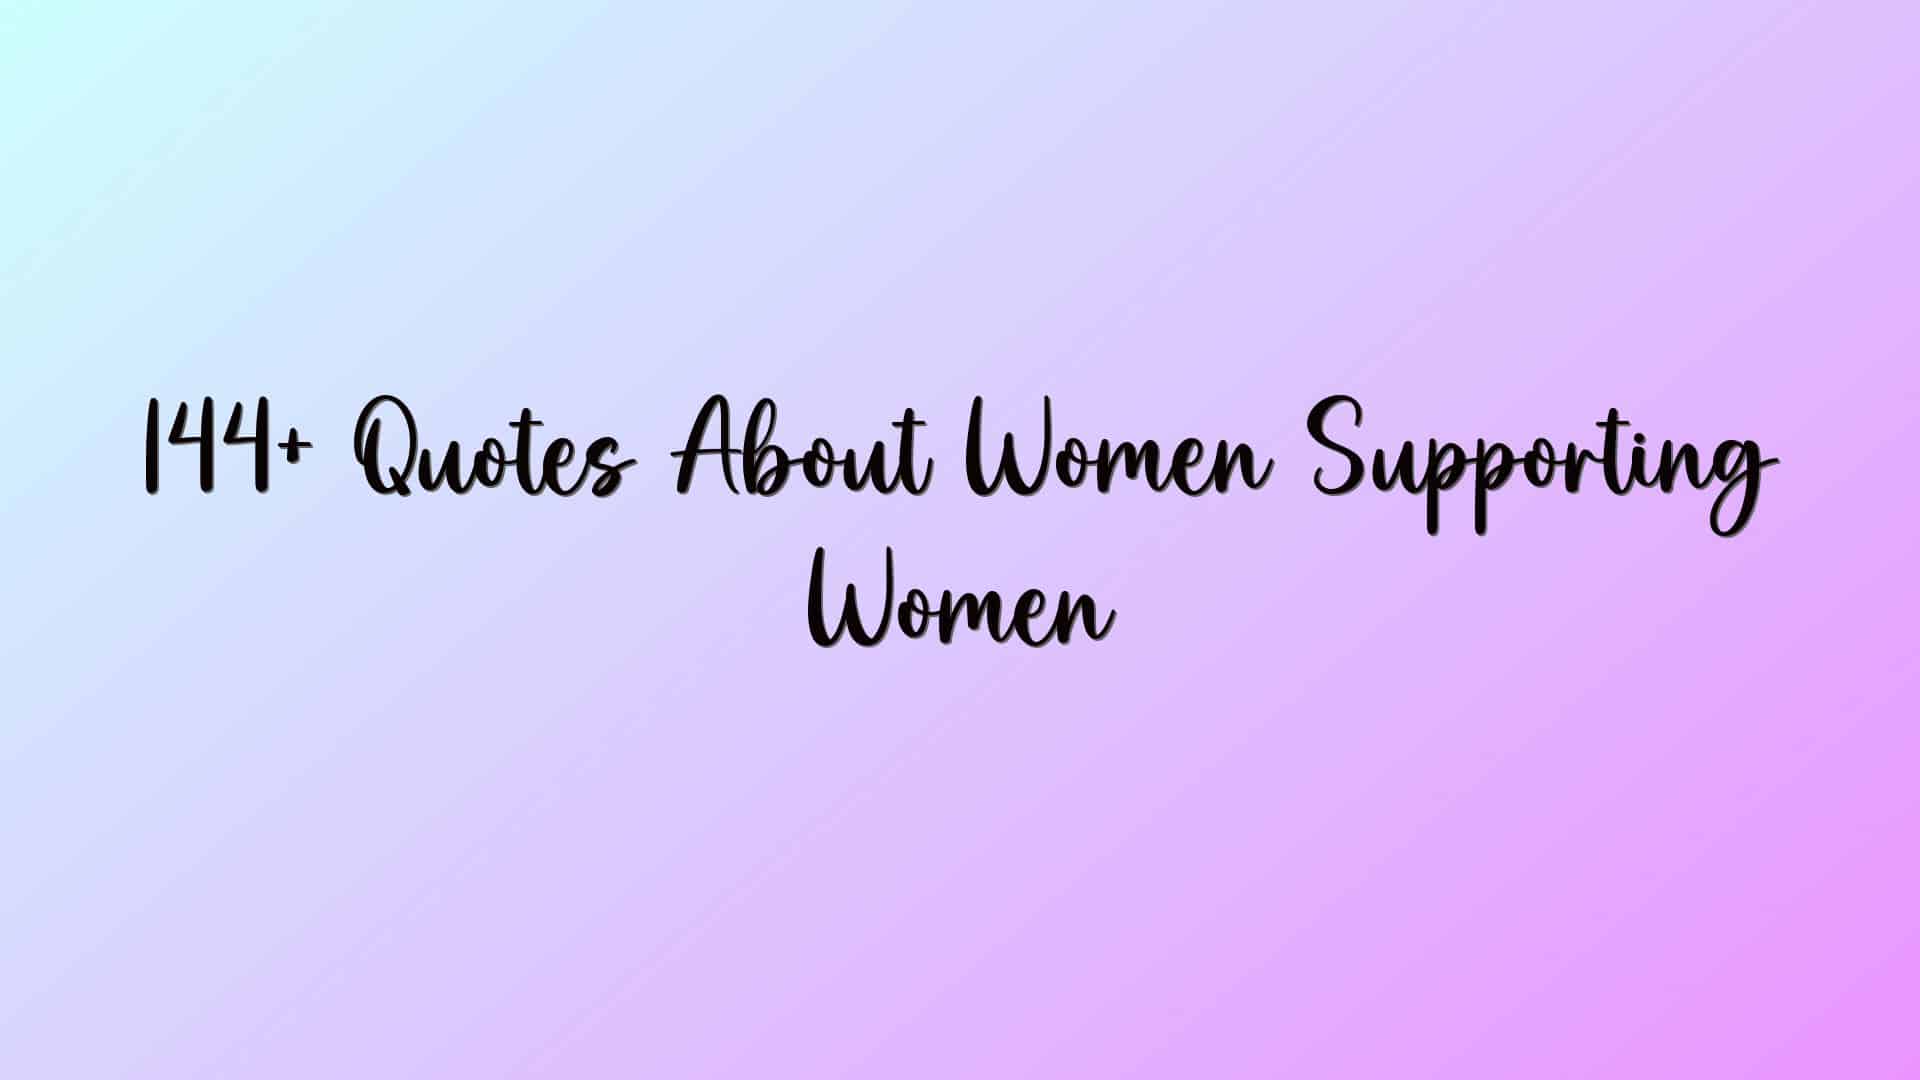 144+ Quotes About Women Supporting Women